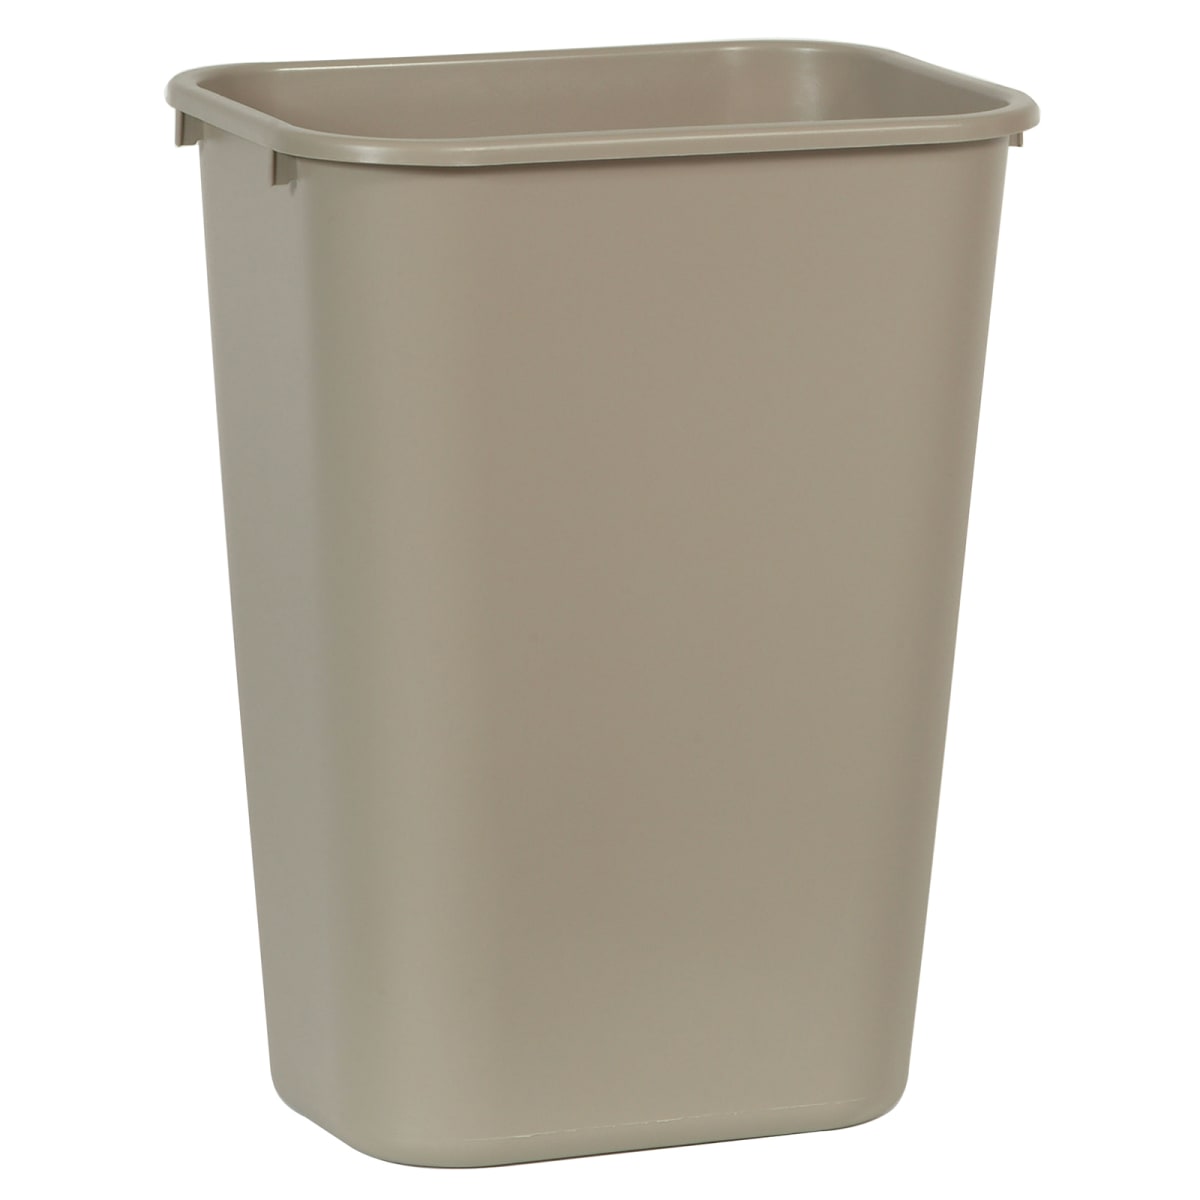 Rubbermaid undefined at